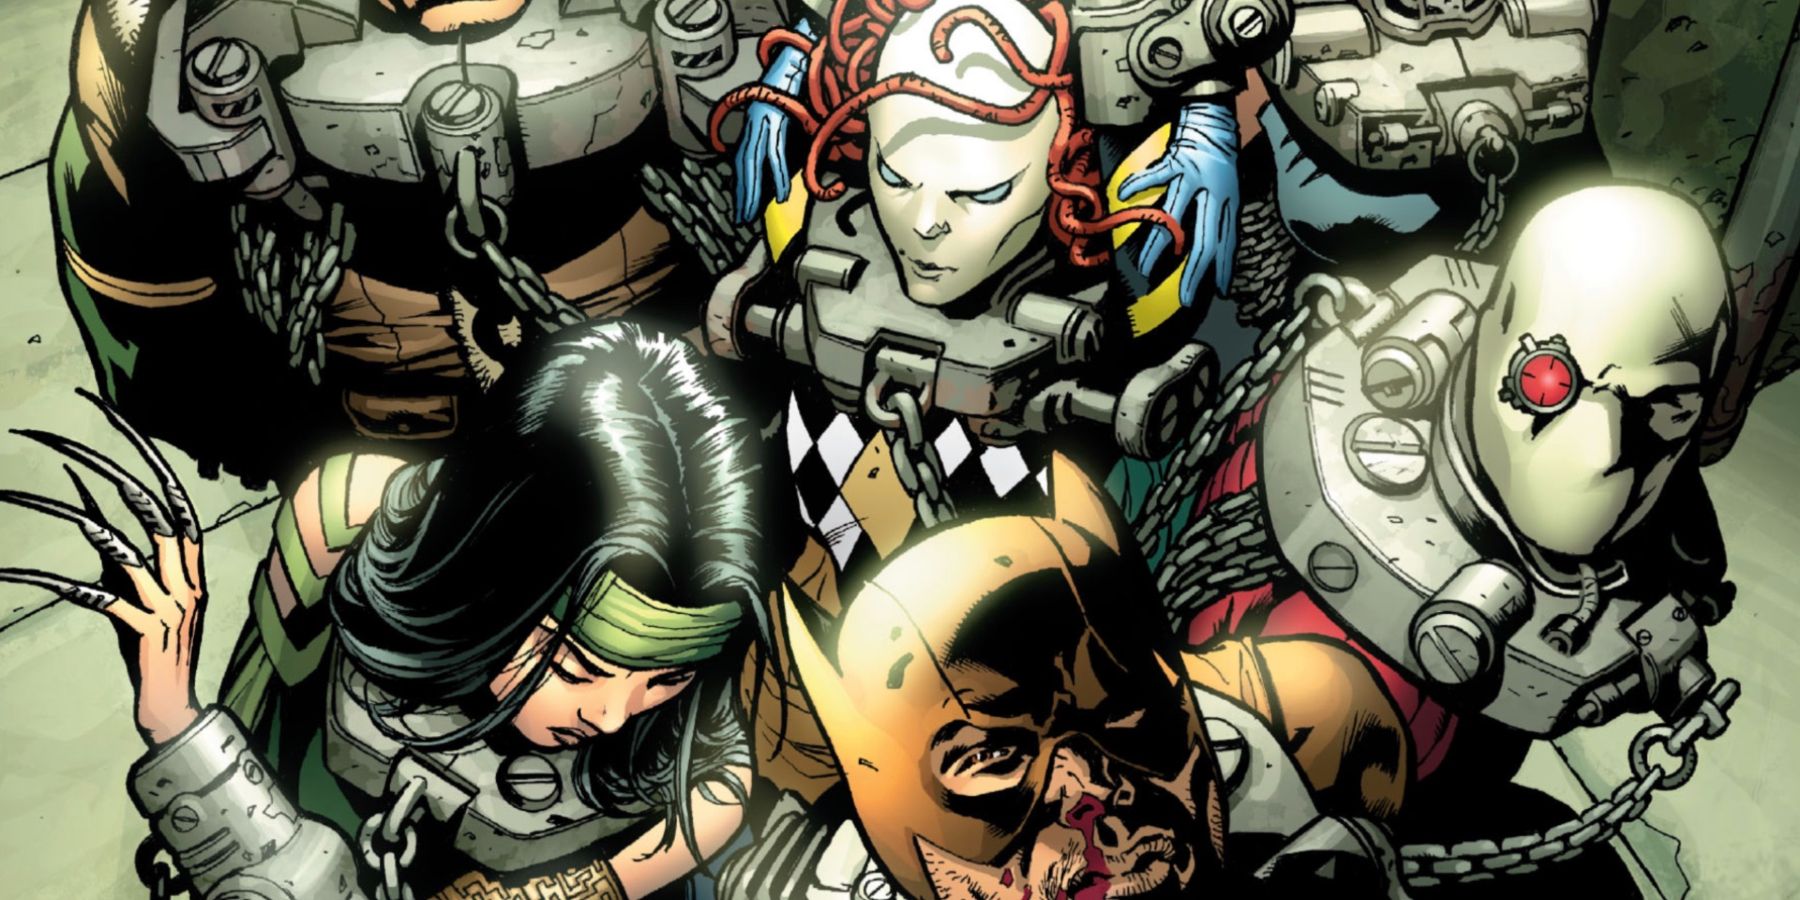 The Secret Six in chained collars in DC's Secret Six.